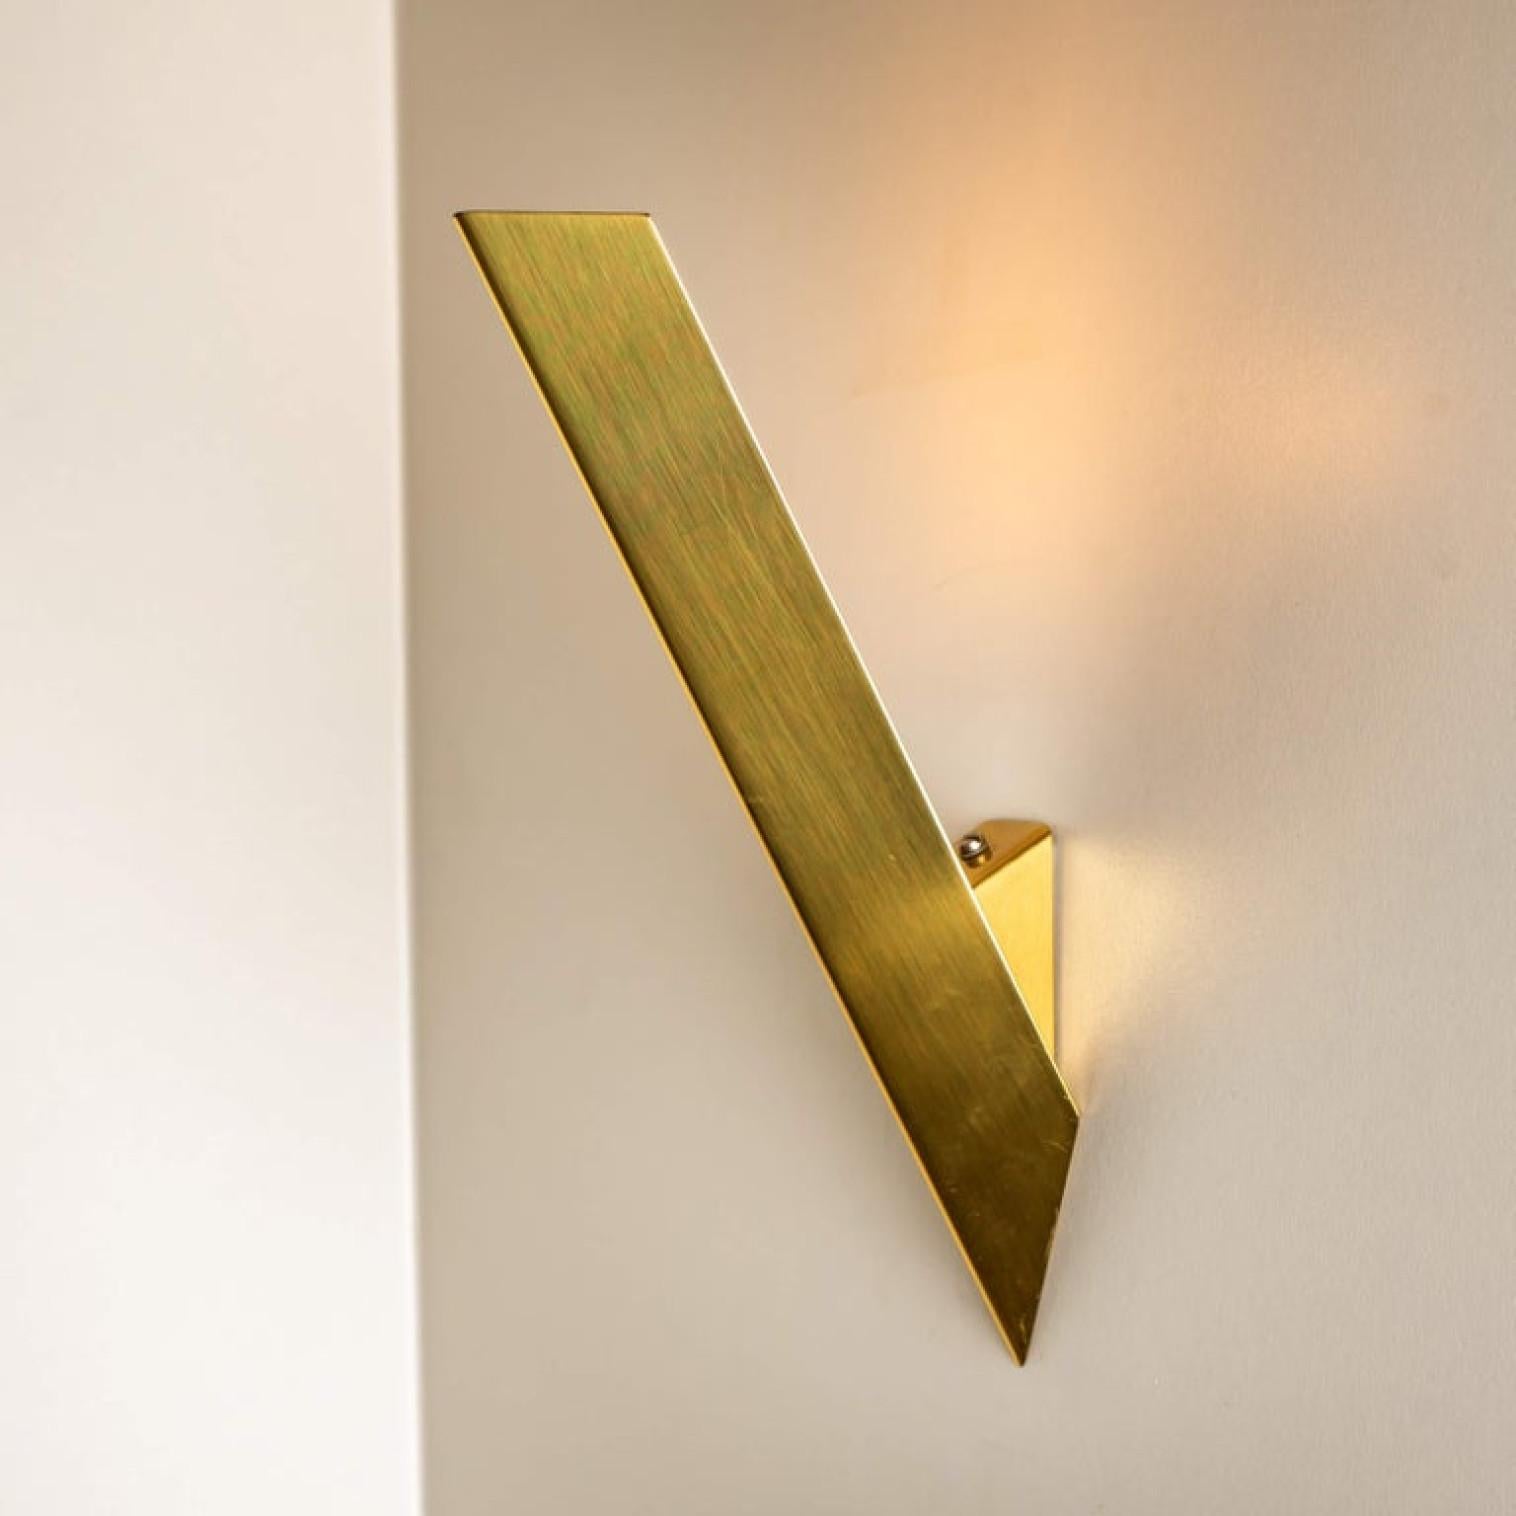 Other 1 of the 2 Pair of Wedge-Shaped High End Wall Lights by J.T. Kalmar, 1970s For Sale